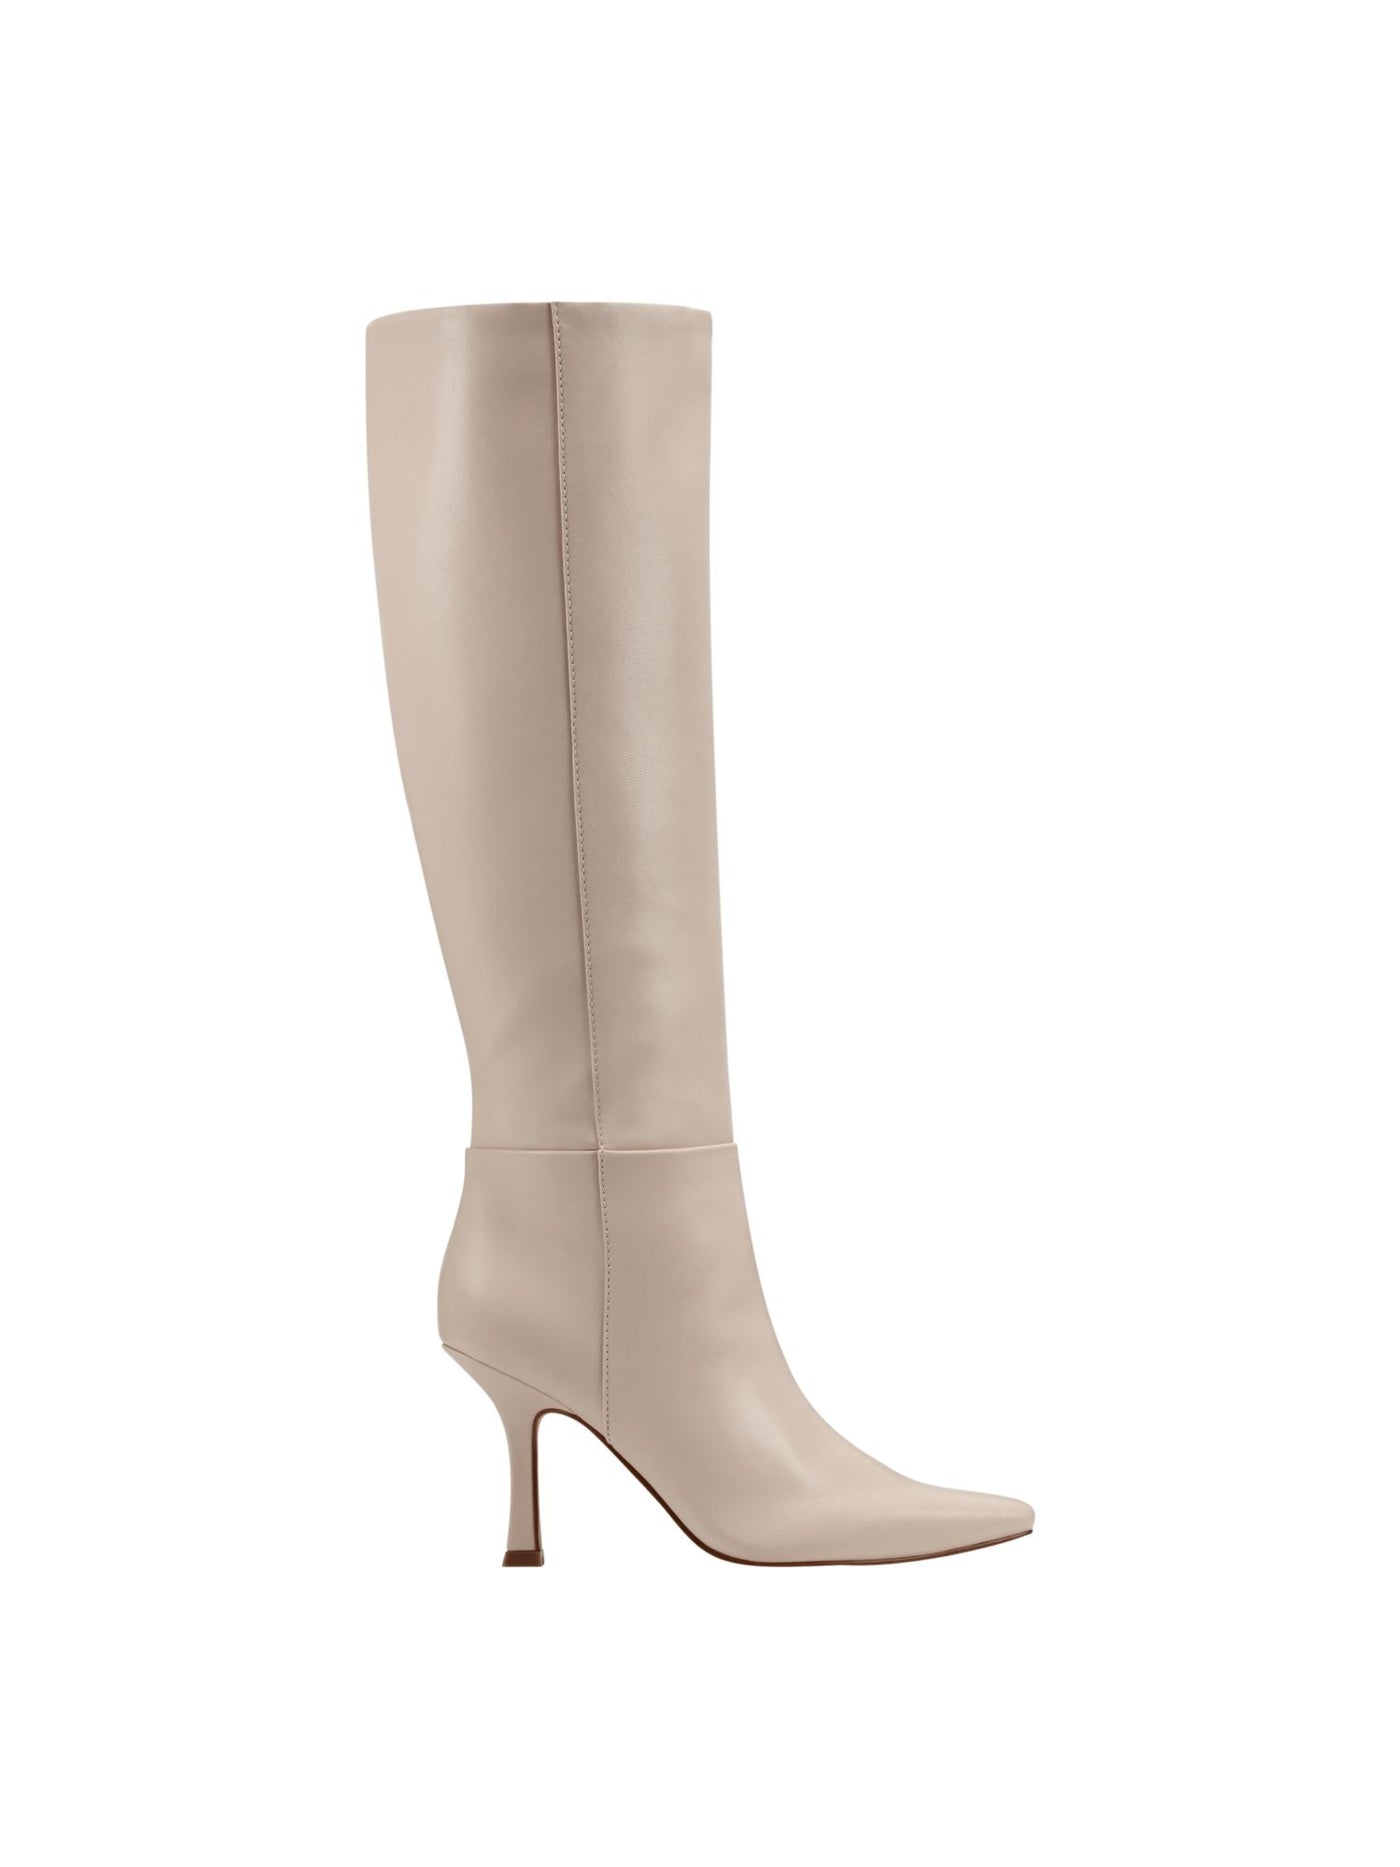 MARC FISHER Womens Ivory Padded Goring Vedant Square Toe Sculpted Heel Zip-Up Dress Boots 6.5 M